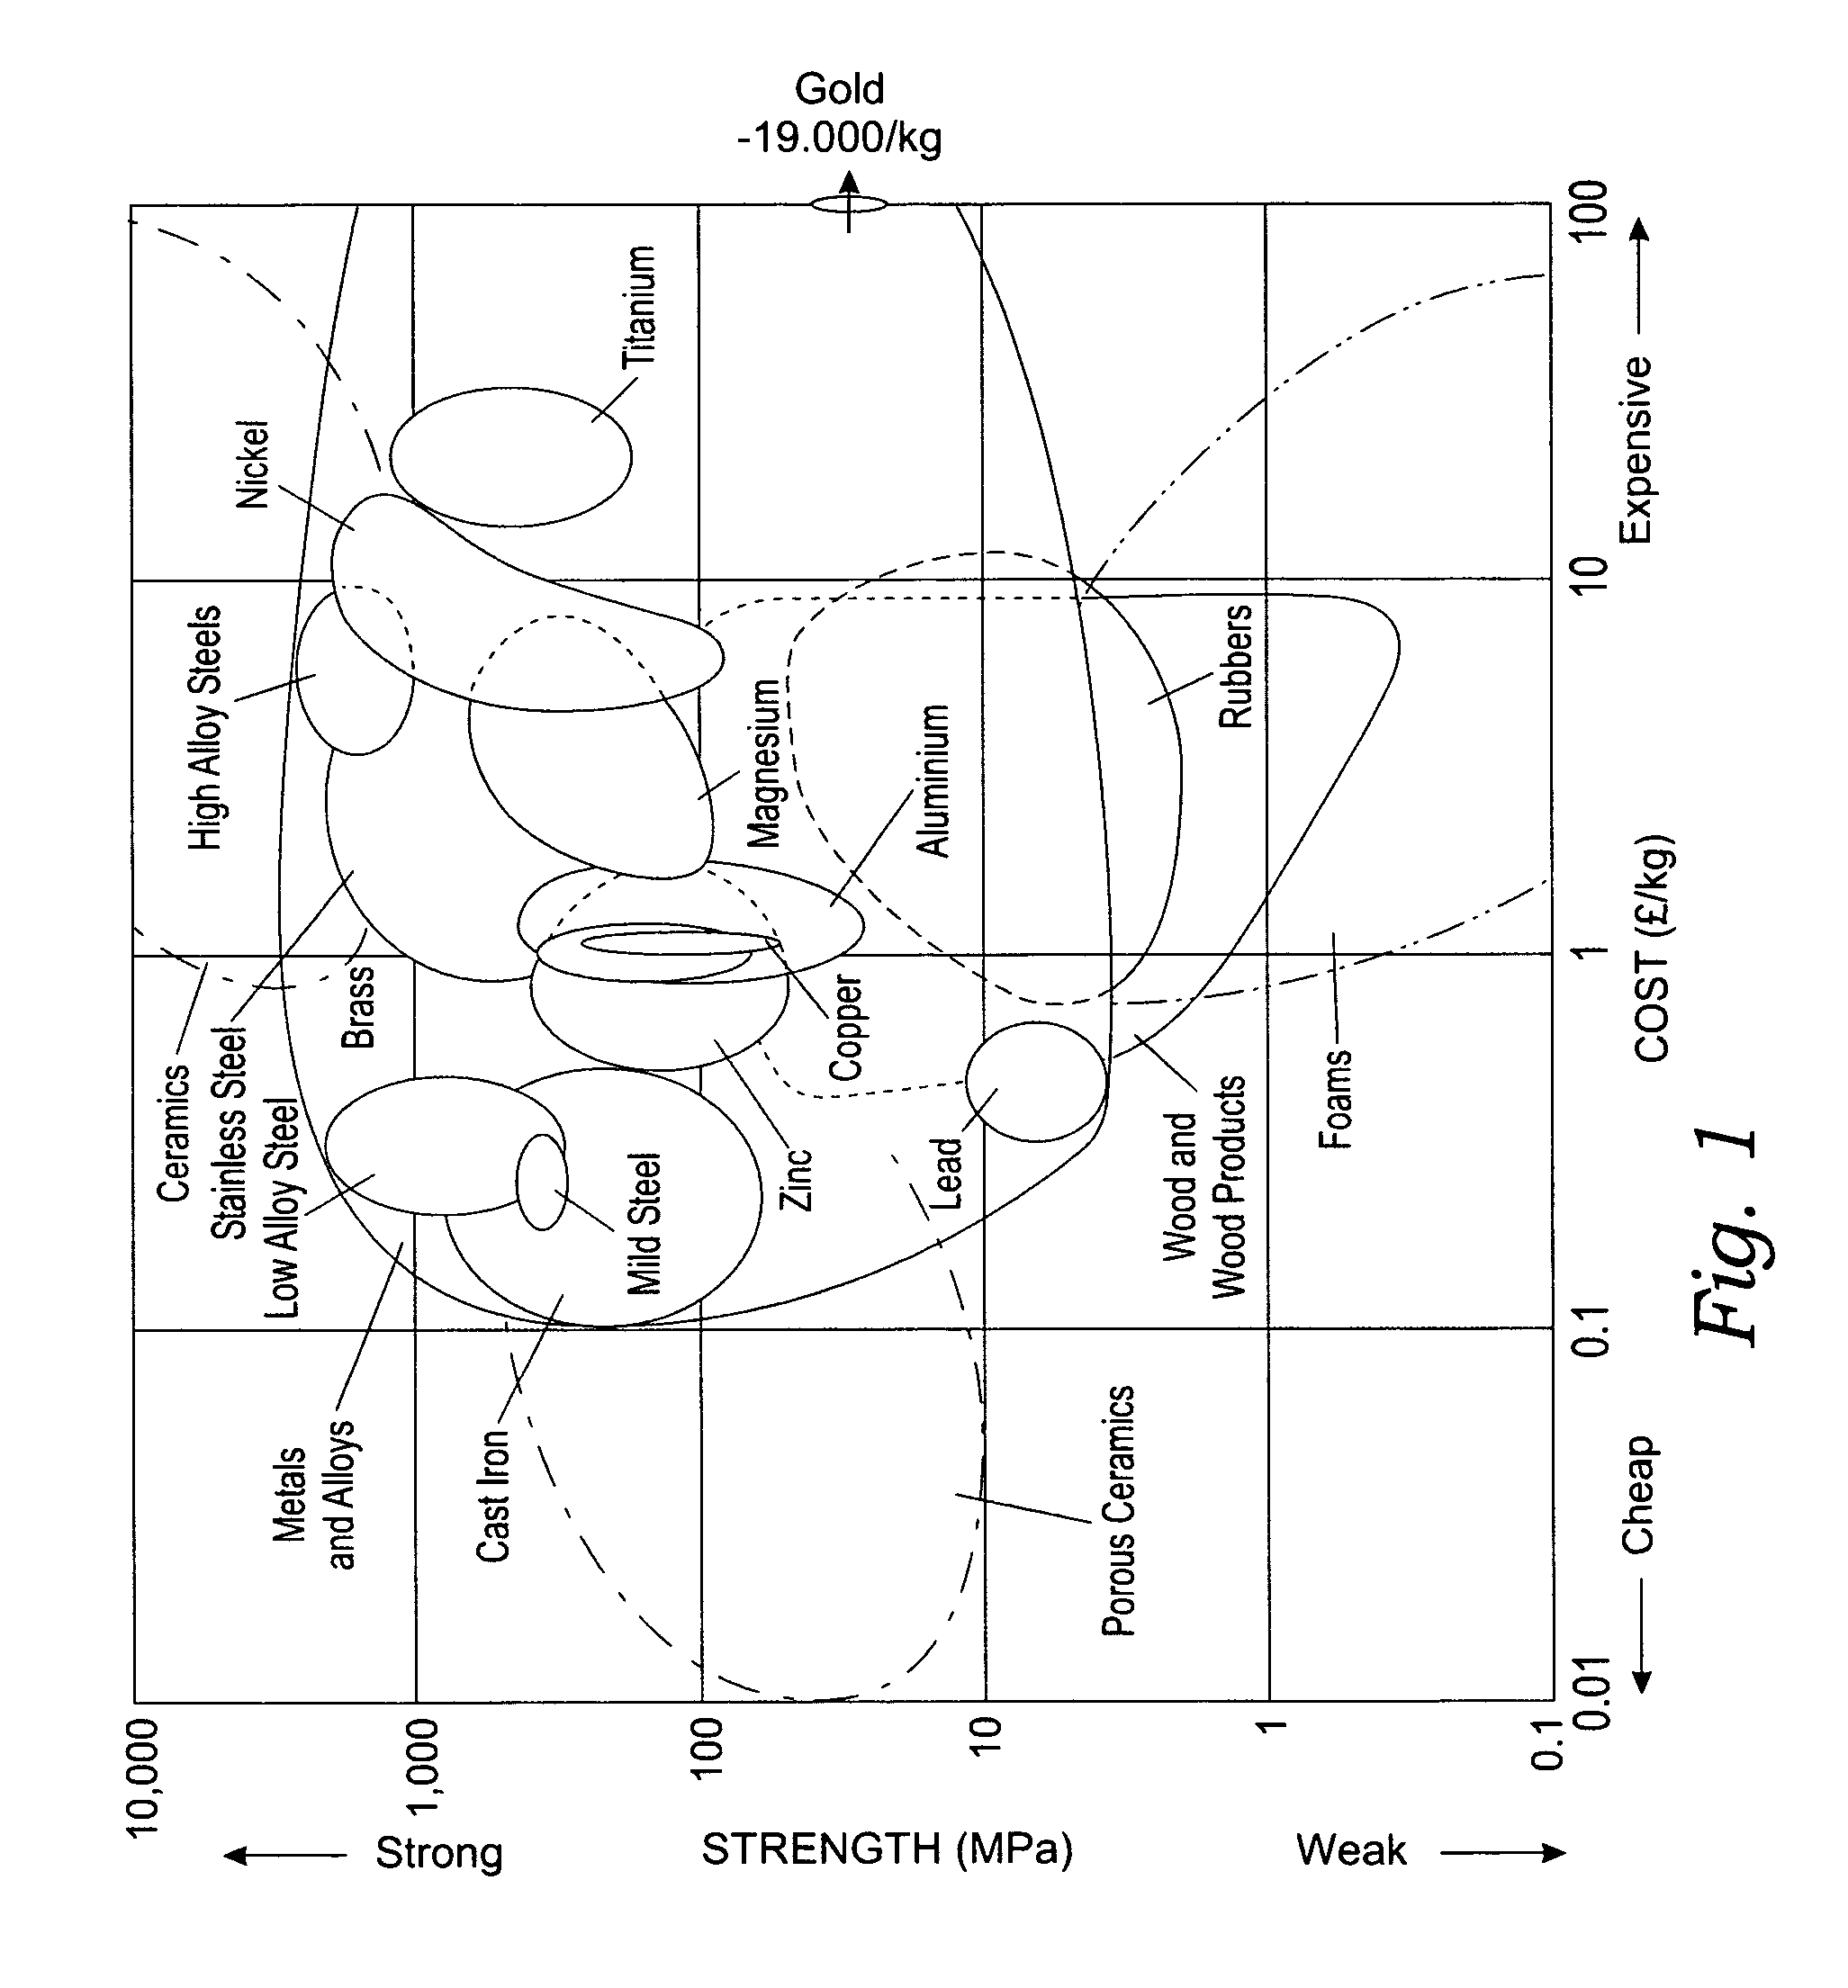 Method for manufacturing automotive structural members